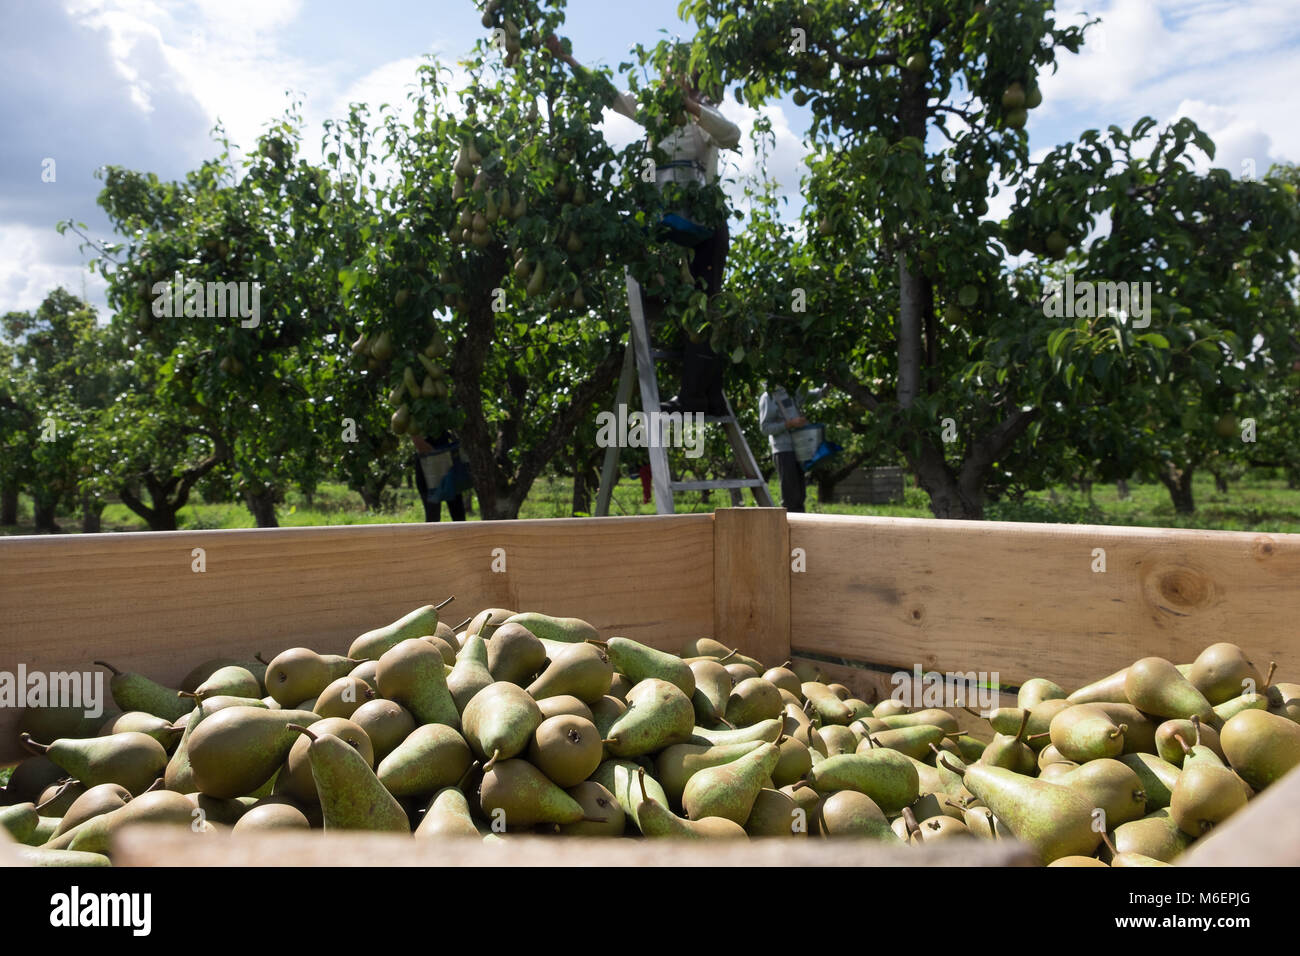 Wooden crate of pears with fruit trees in the background during harvest Stock Photo